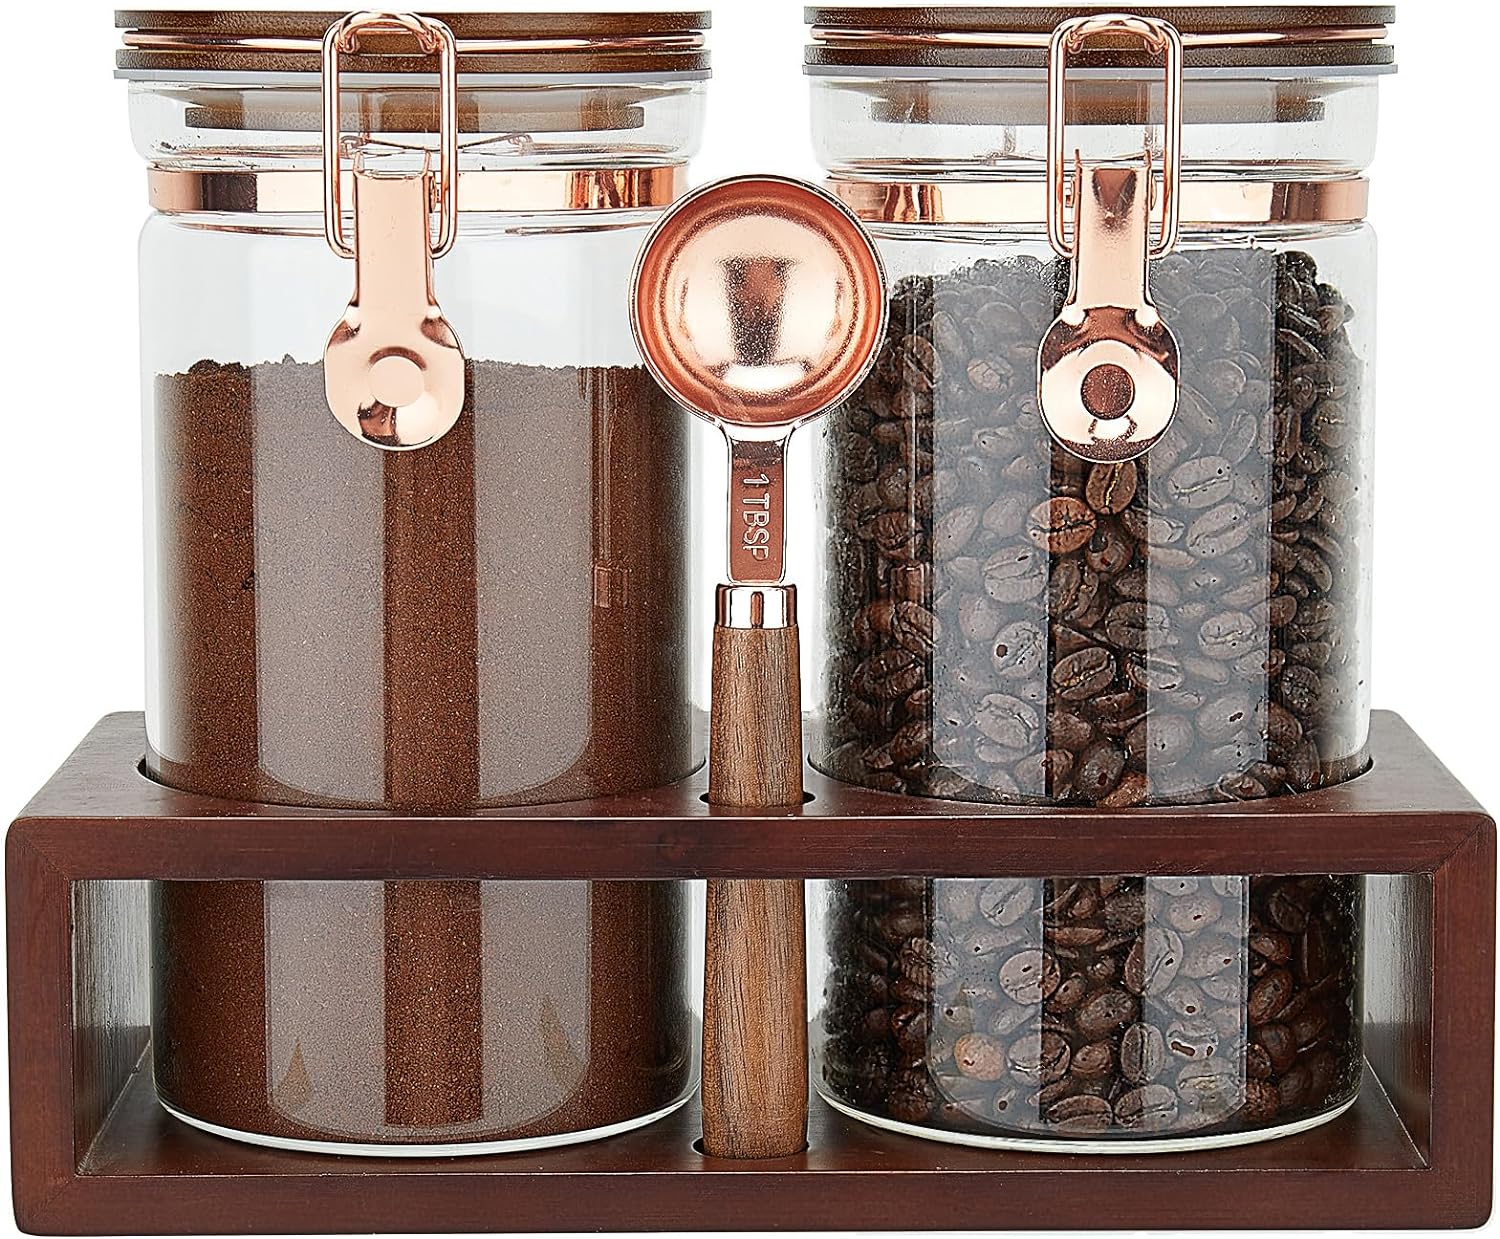 SIQOLNY Glass Coffee Container with Wooden Shelf, 2 x 40 FLOZ Coffee Bean Storage with Sealed Closure Clips and Copper Spoon, Kitchen Large Capacity Food Storage Jar, Ground Coffee Container